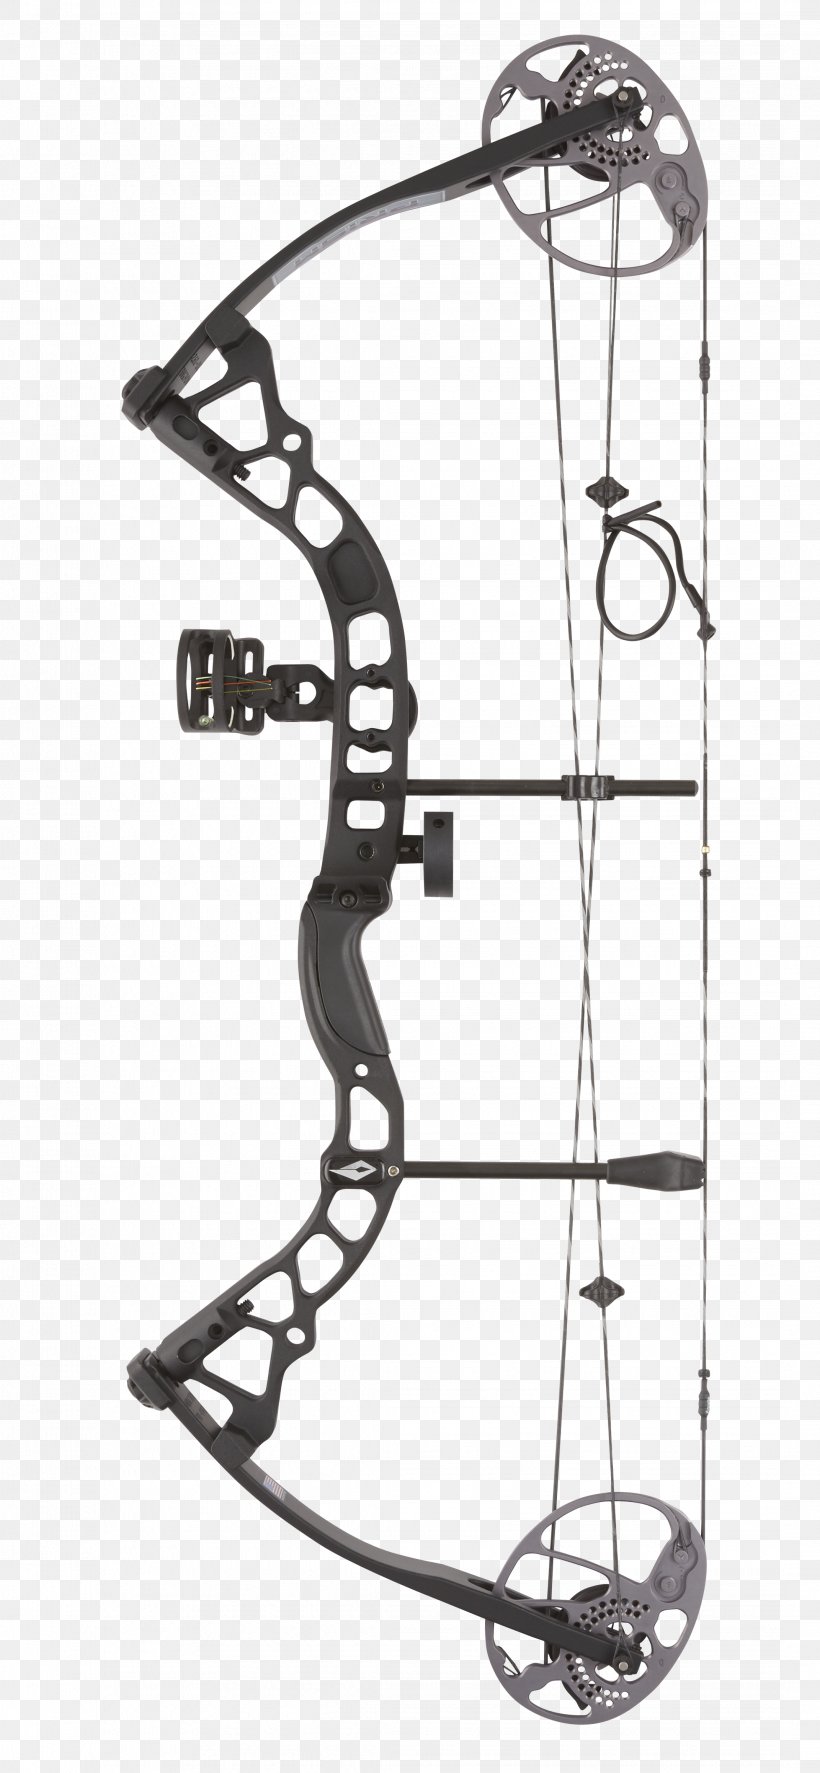 Compound Bows Bow And Arrow Diamond Archery Recurve Bow, PNG, 2142x4632px, Compound Bows, Archery, Bit, Black And White, Bow Download Free